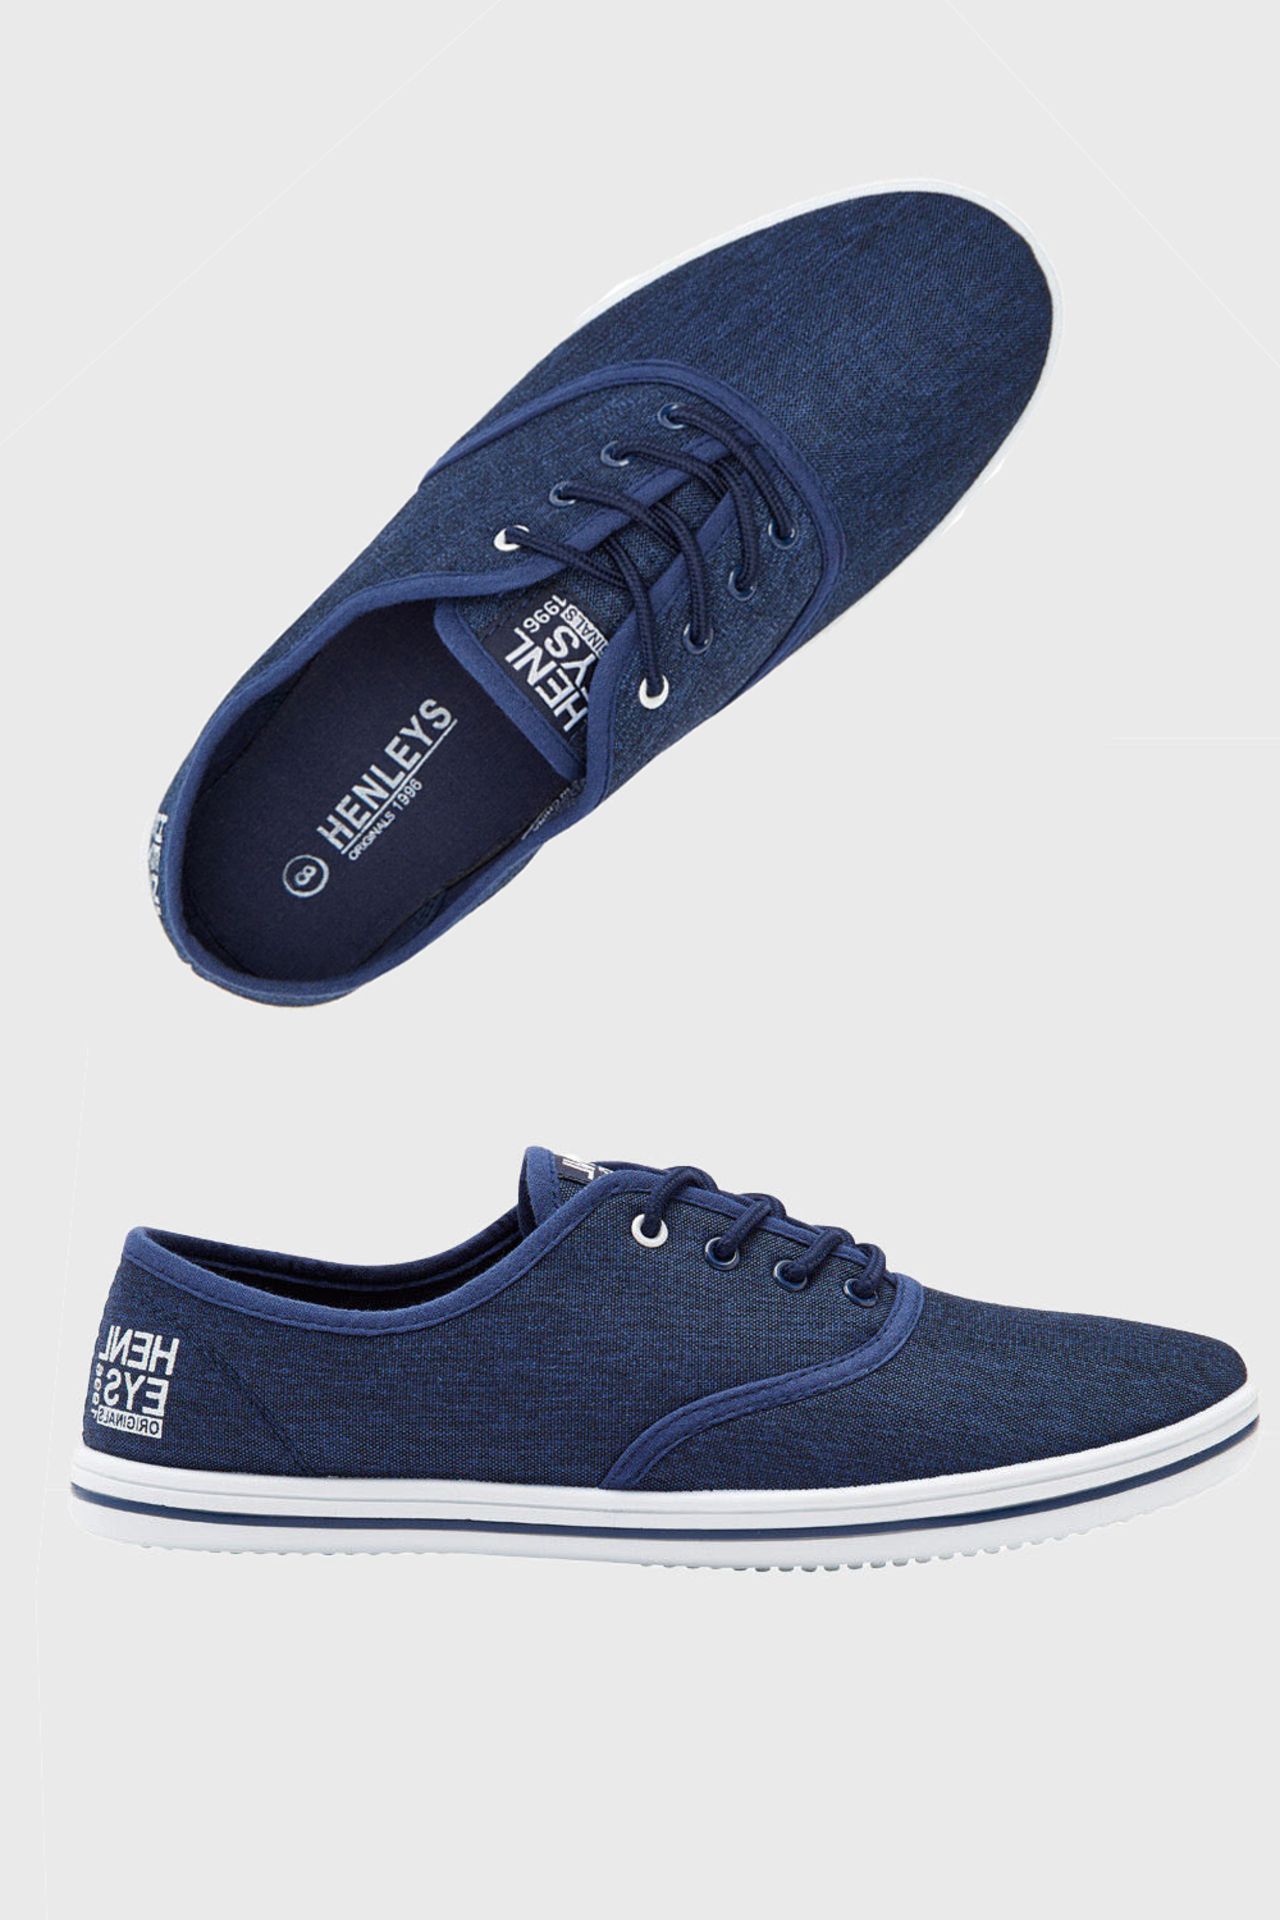 14 X BRAND NEW MENS HENLEY'S LACE UP NAVY TRAINER PLIMSOLLS - 7 X IN SIZE UK 7 AND 7 X IN SIZE UK